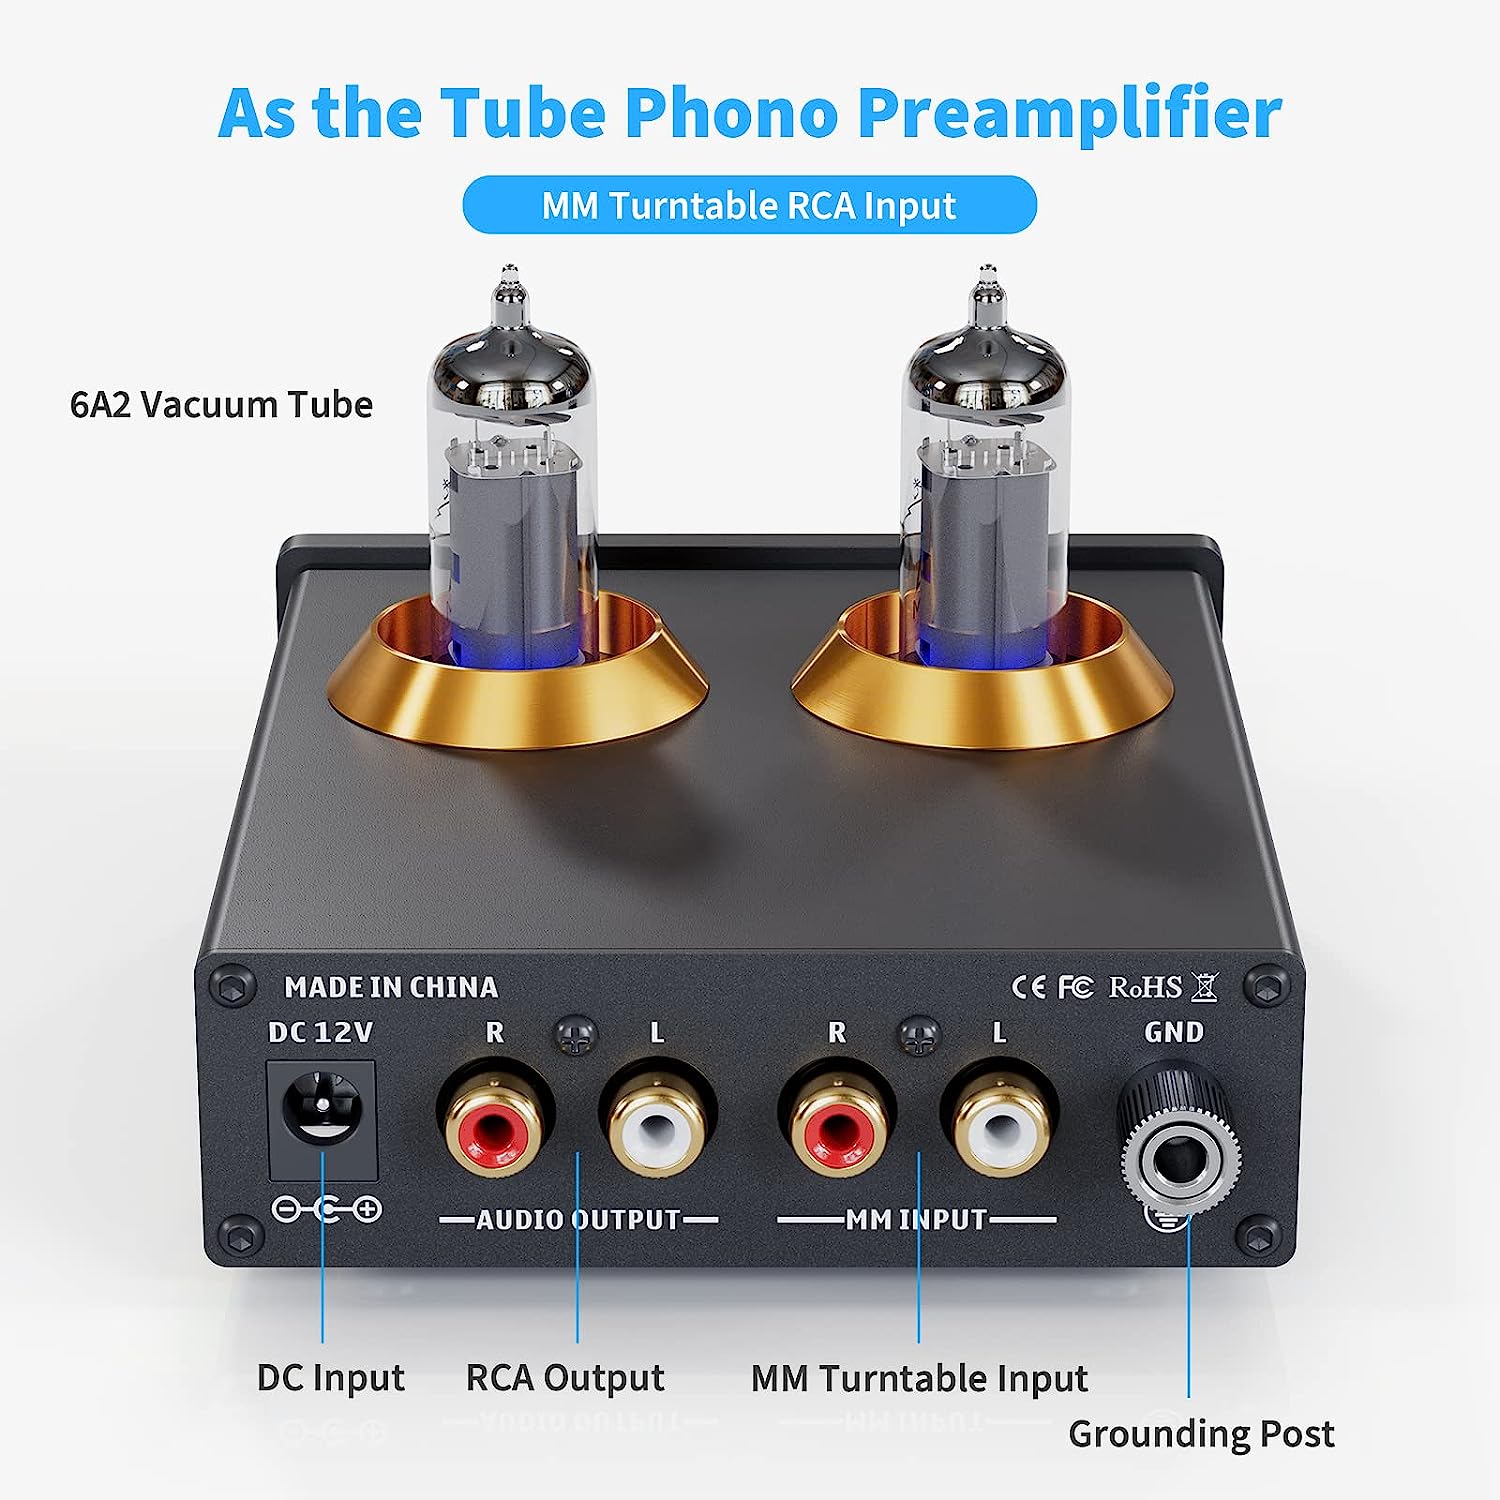 Fosi Tubed Phono Preamplifier